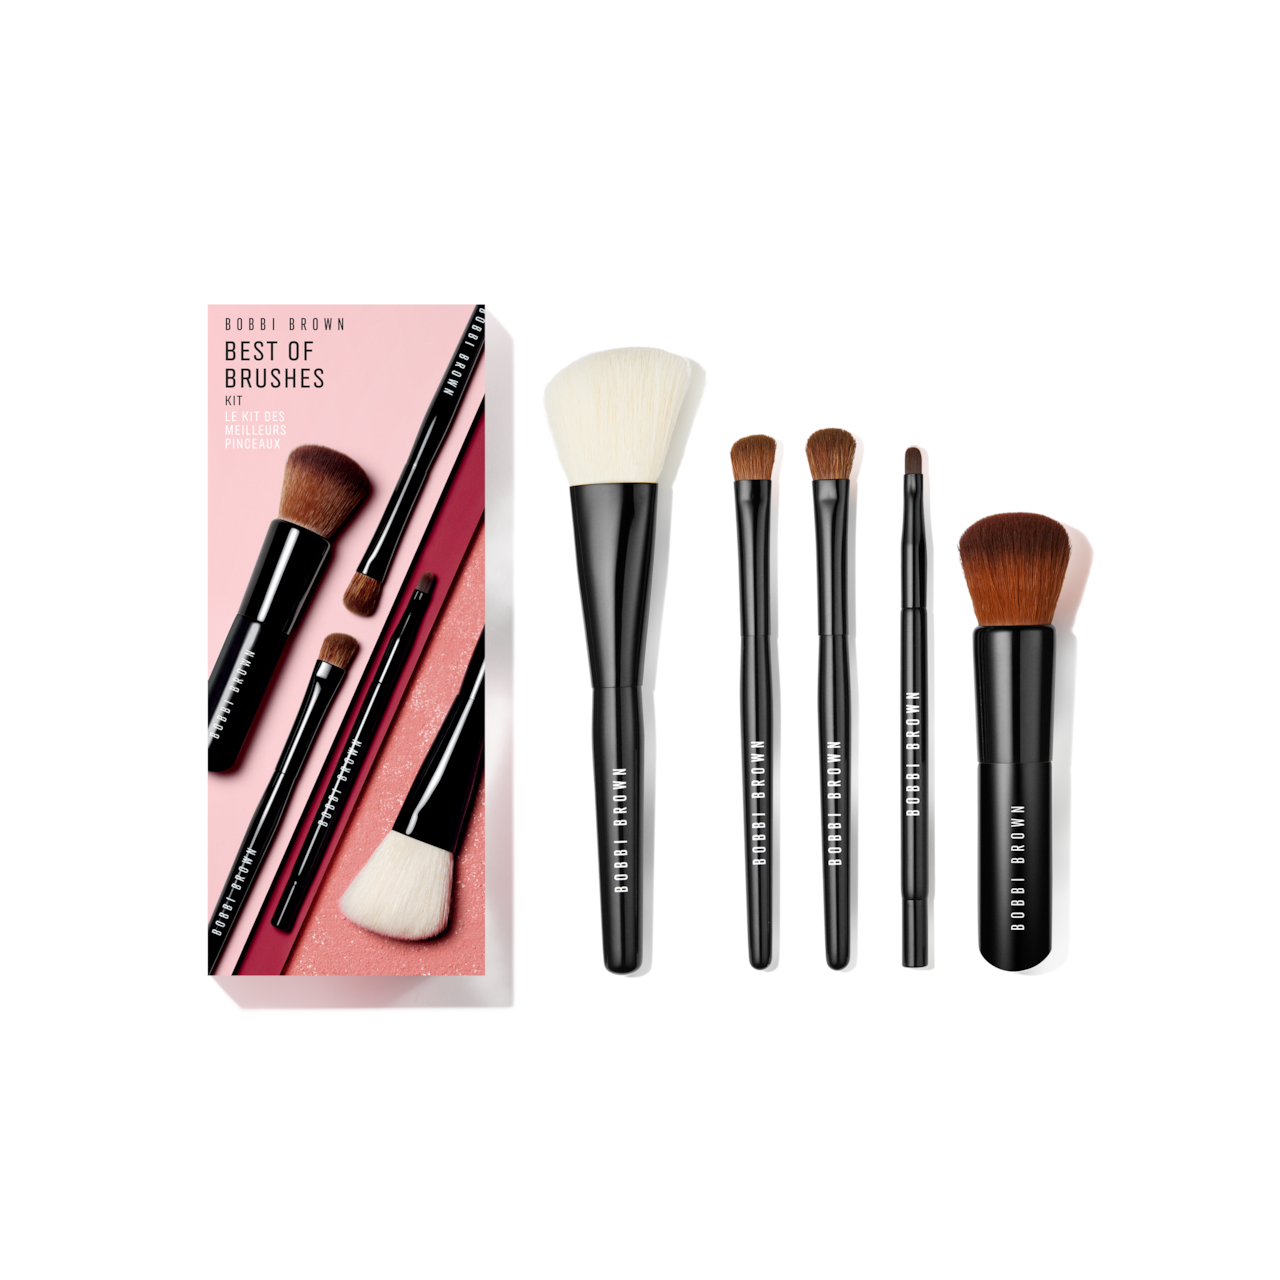 <p><strong>$65.00</strong></p><p><a href="https://go.redirectingat.com?id=74968X1553576&url=https%3A%2F%2Fwww.bobbibrowncosmetics.com%2Fproduct%2F13996%2F120325%2Fpalettes-and-sets%2Fbest-of-brushes-kit%2Ffh24&sref=https%3A%2F%2Fwww.townandcountrymag.com%2Fstyle%2Fbeauty-products%2Fg41319024%2Fbest-makeup-brush-sets%2F">Shop Now</a></p>